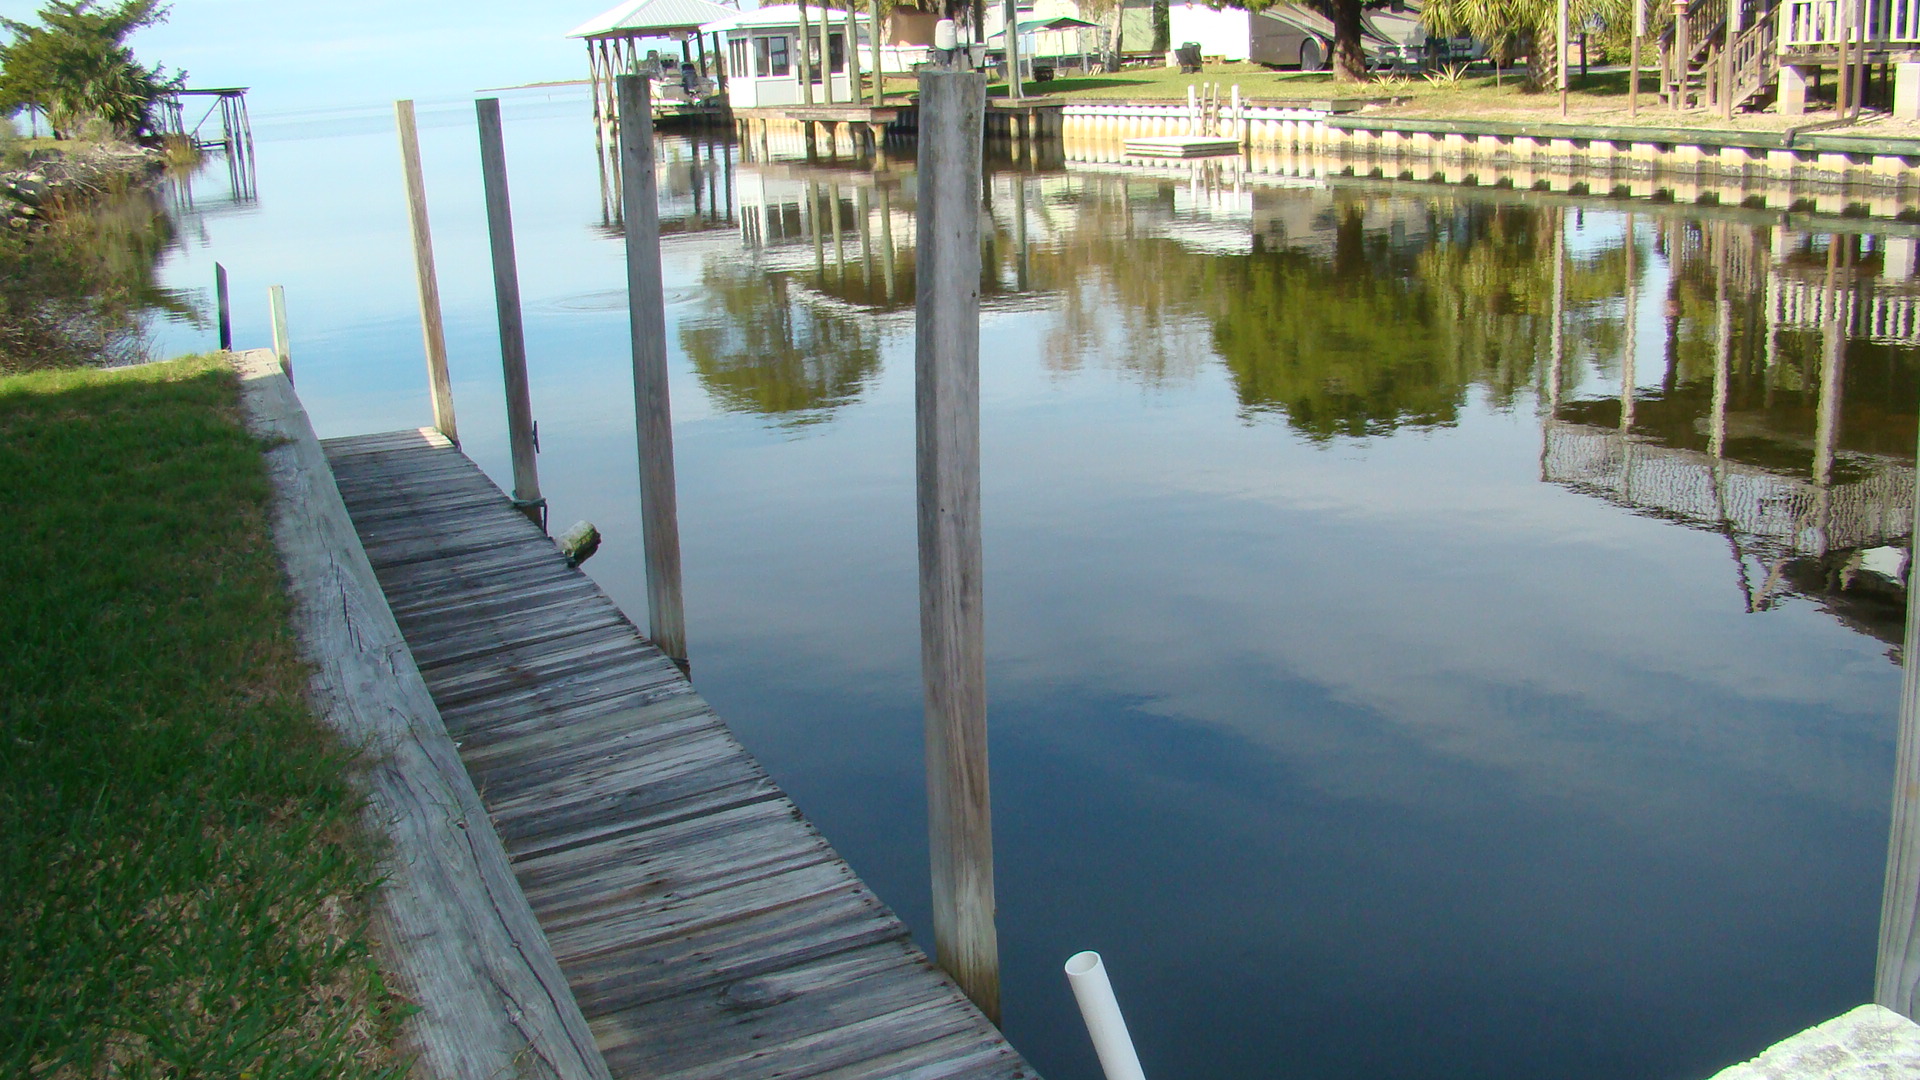 Waterfront Canal View - Florida Vacation Rentals - Horseshoe Beach Real Estate - Tammy Bryan